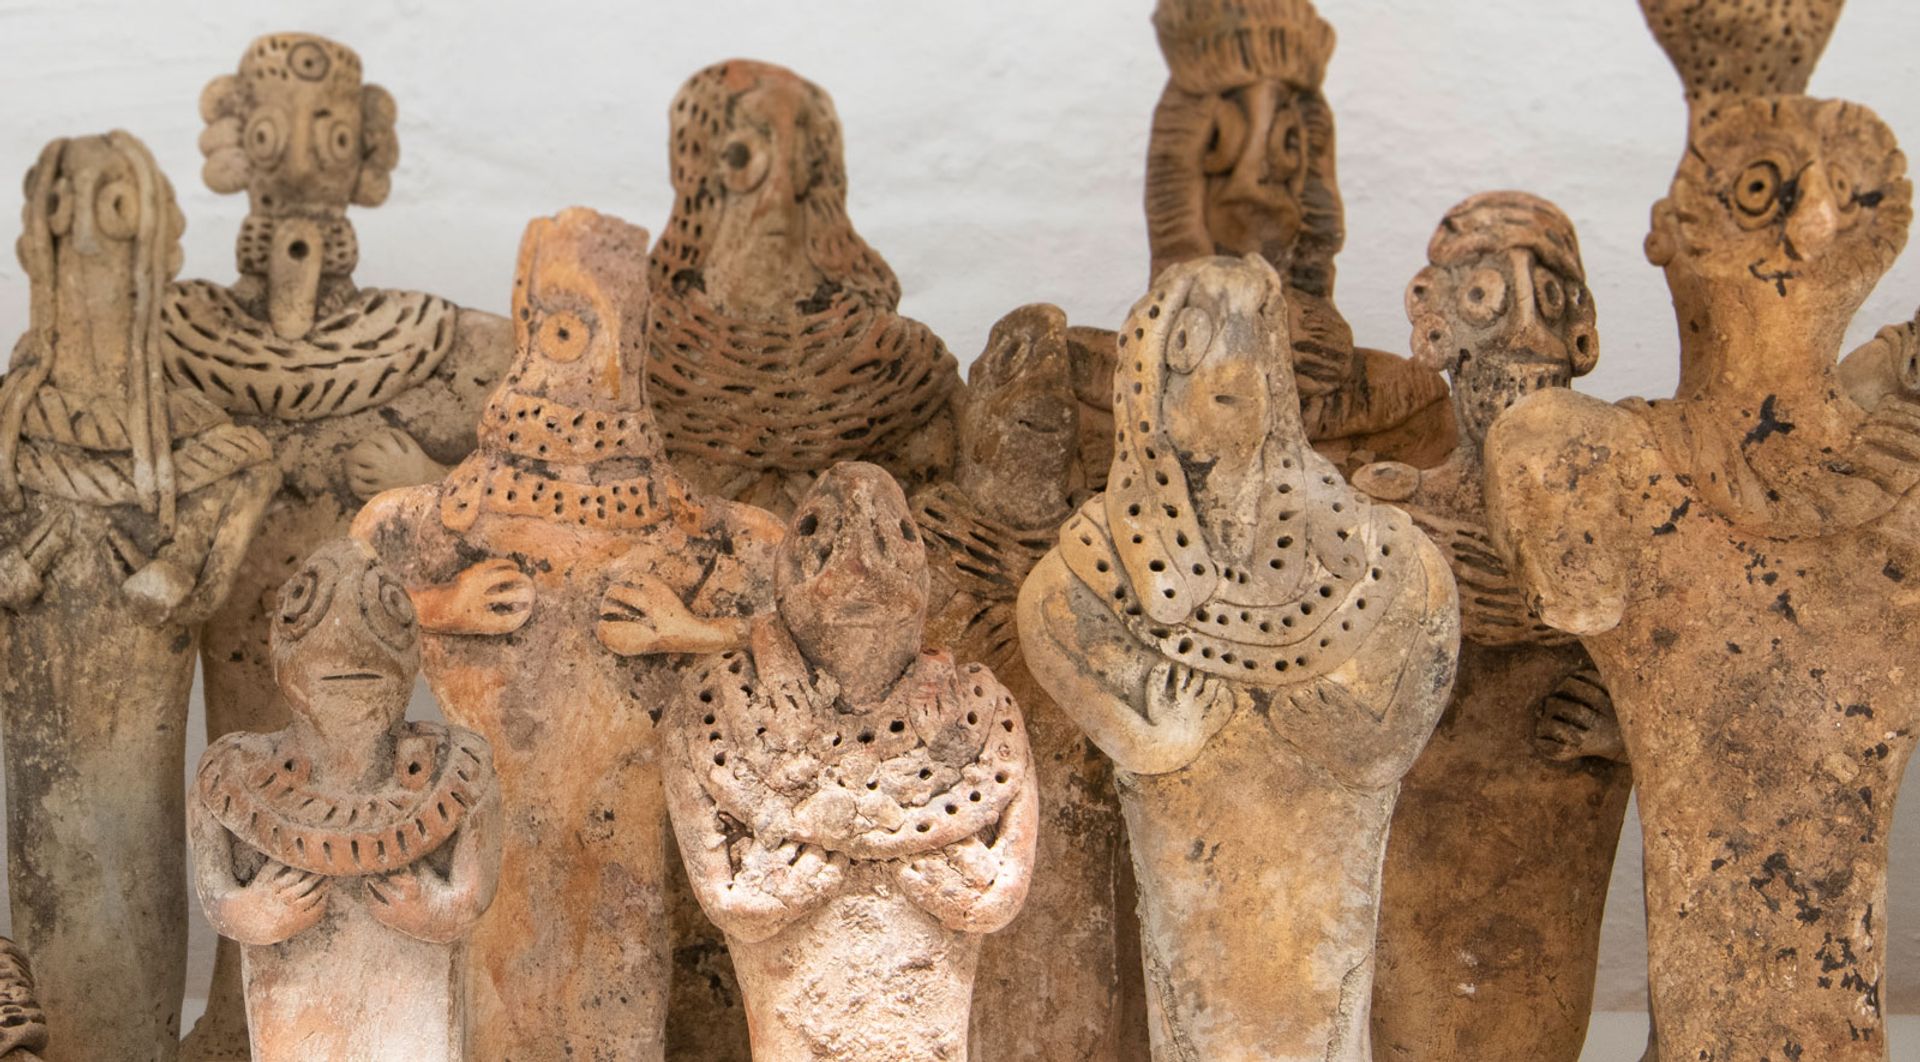 A selection of fake figurines seized by British customs © Trustees of the British Museum 2020